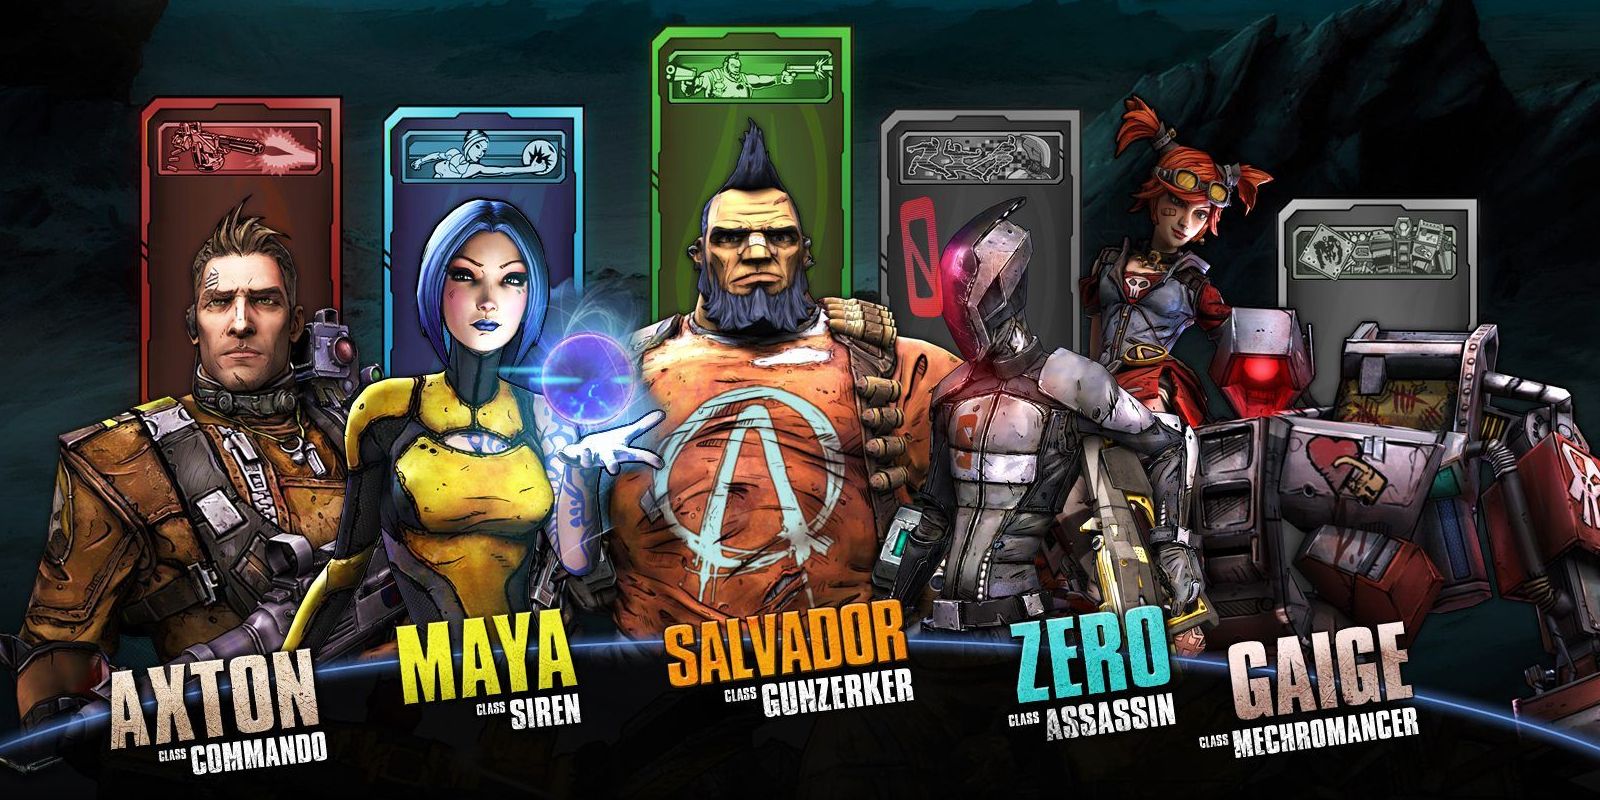 Characters from Borderlands 2